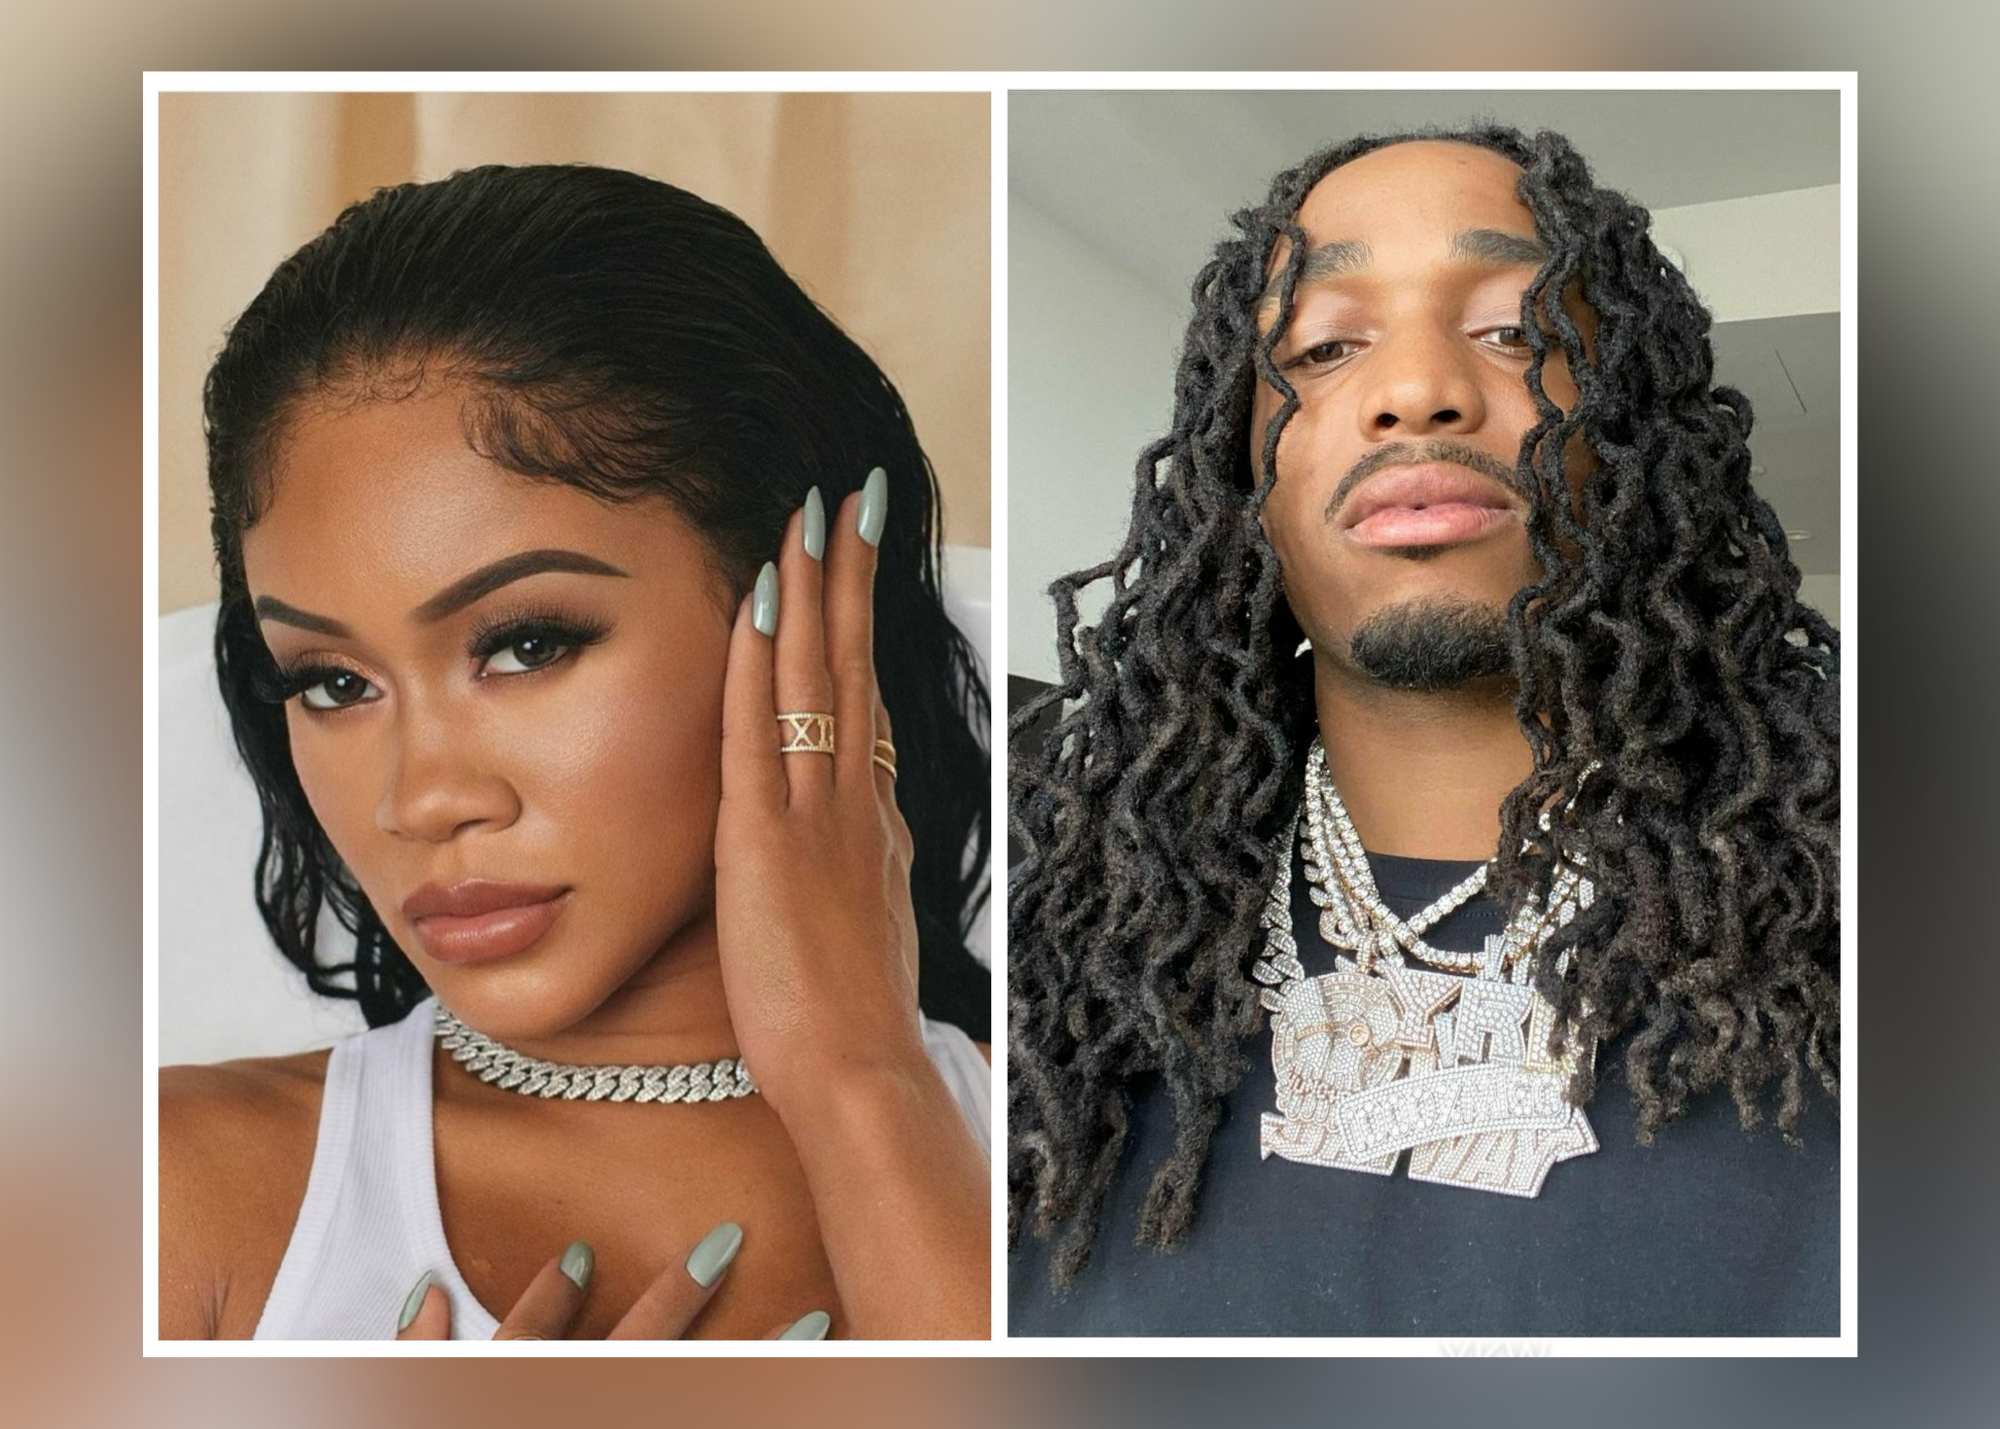 Saweetie And Quavo Speak Out After Video of Elevator Fight Surfaces